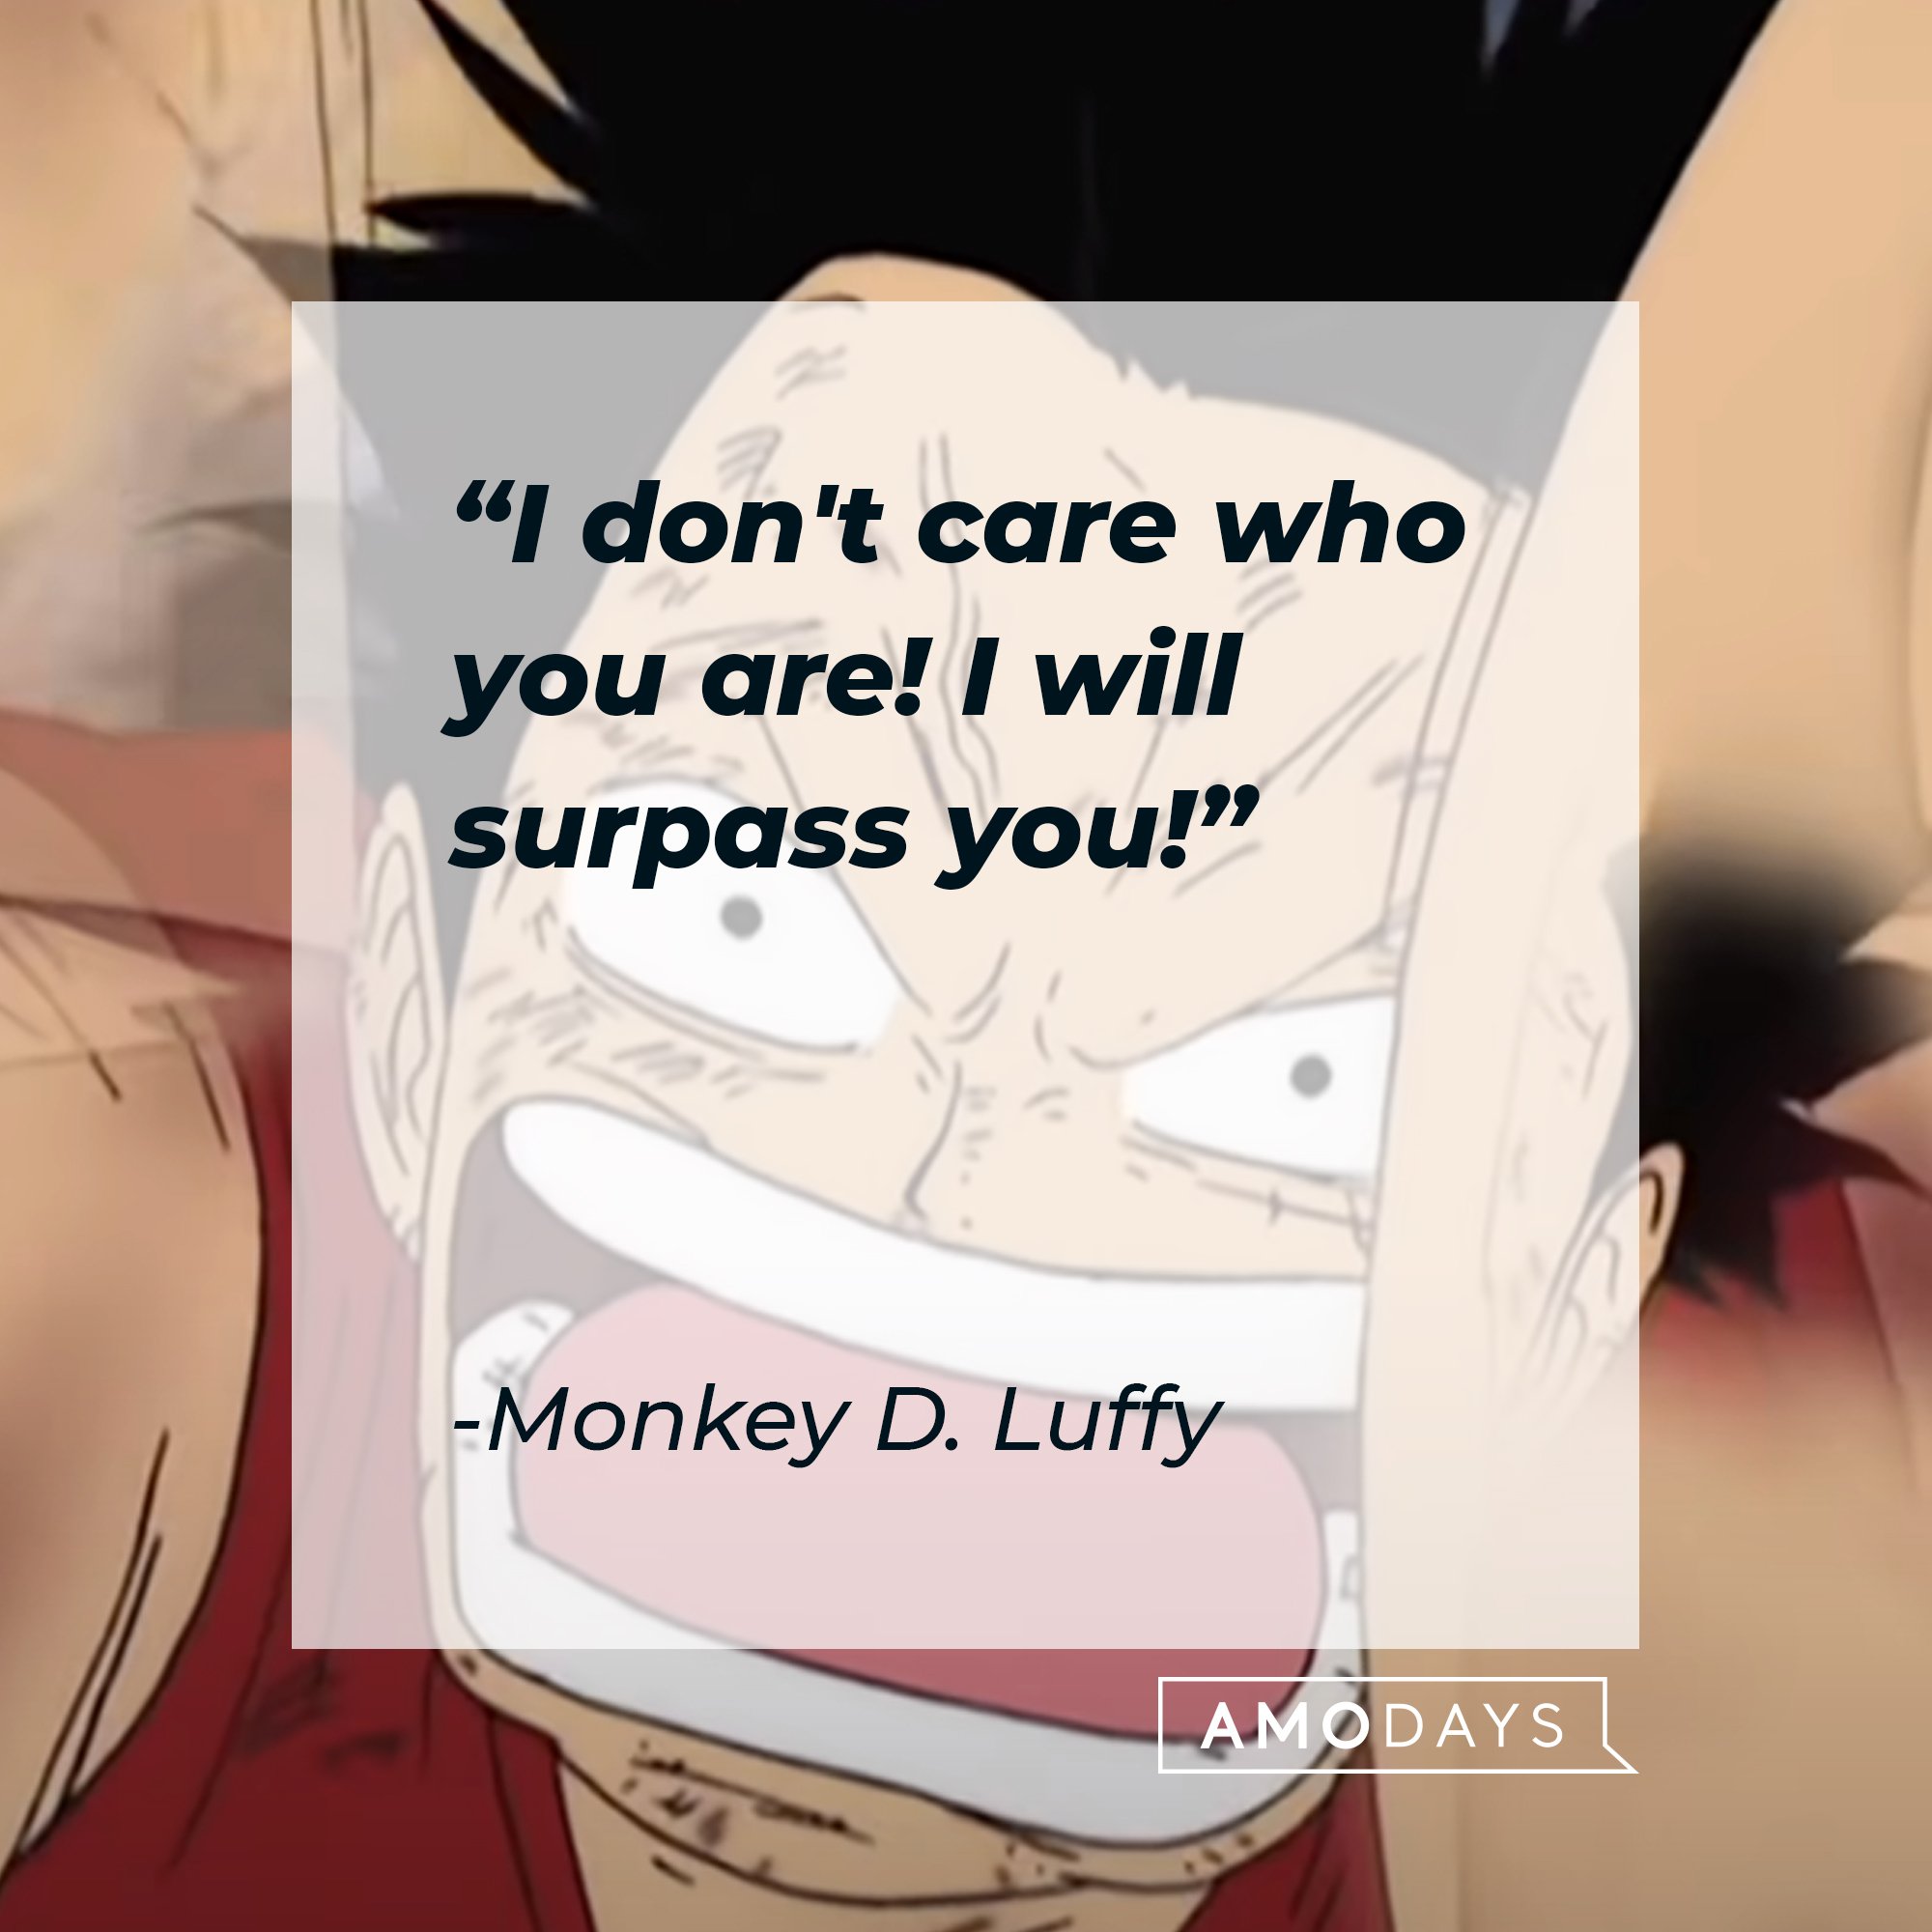 Monkey D. Luffy's quote: "I don't care who you are! I will surpass you!" | Image: AmoDays